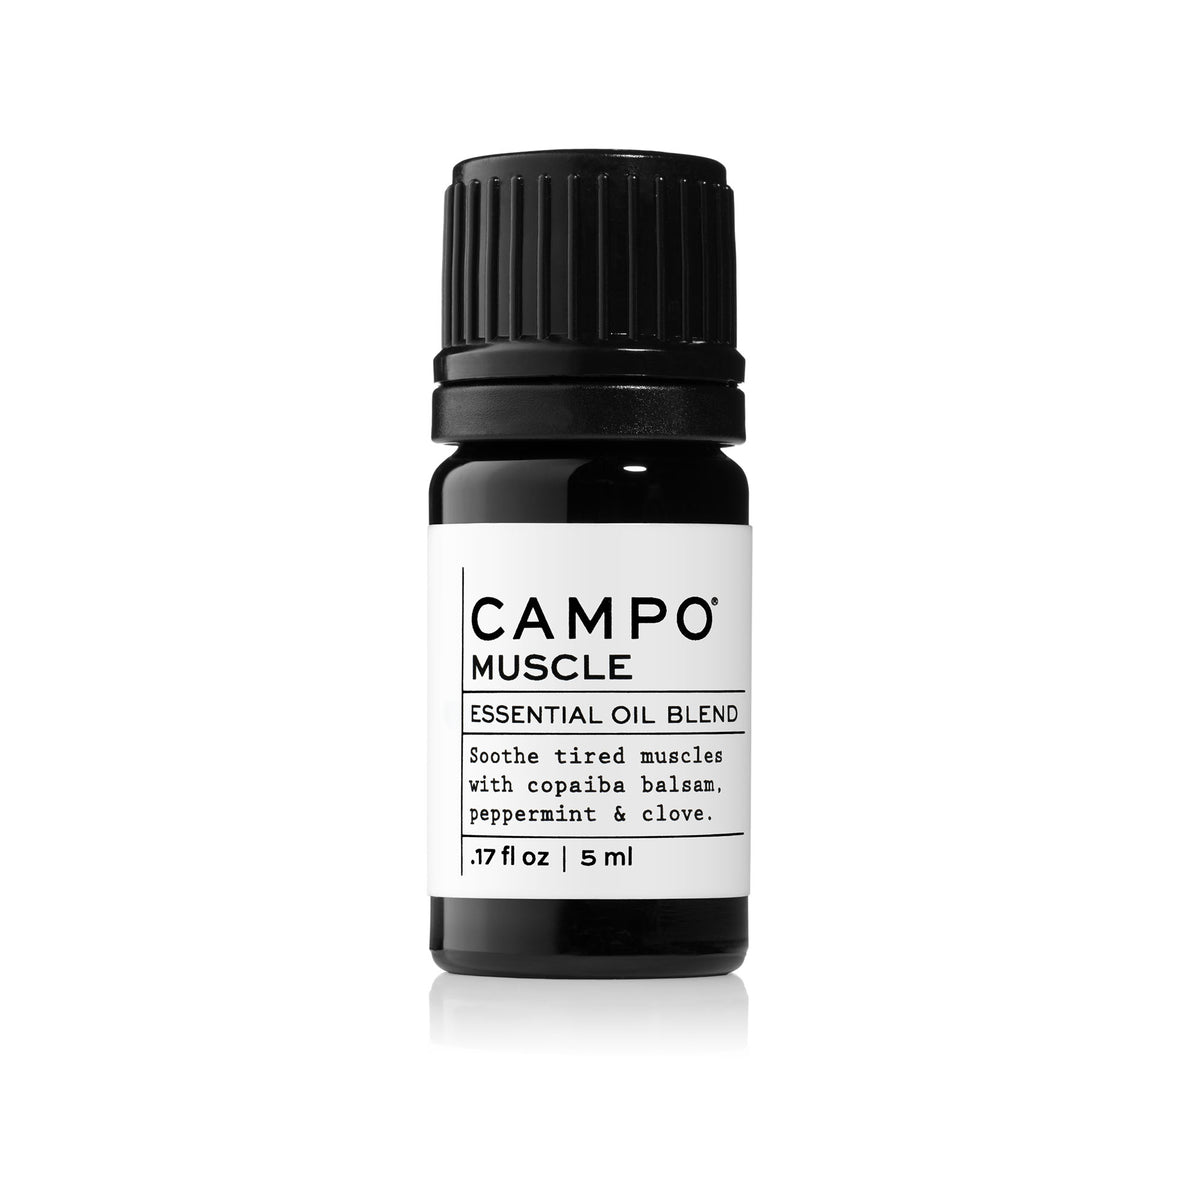 Campo Beauty MUSCLE Blend 15 ml Essential Oil. Soothe sore muscles &amp; pain with this 100% natural essential oil blend of copaiba balsam, peppermint &amp; clove.